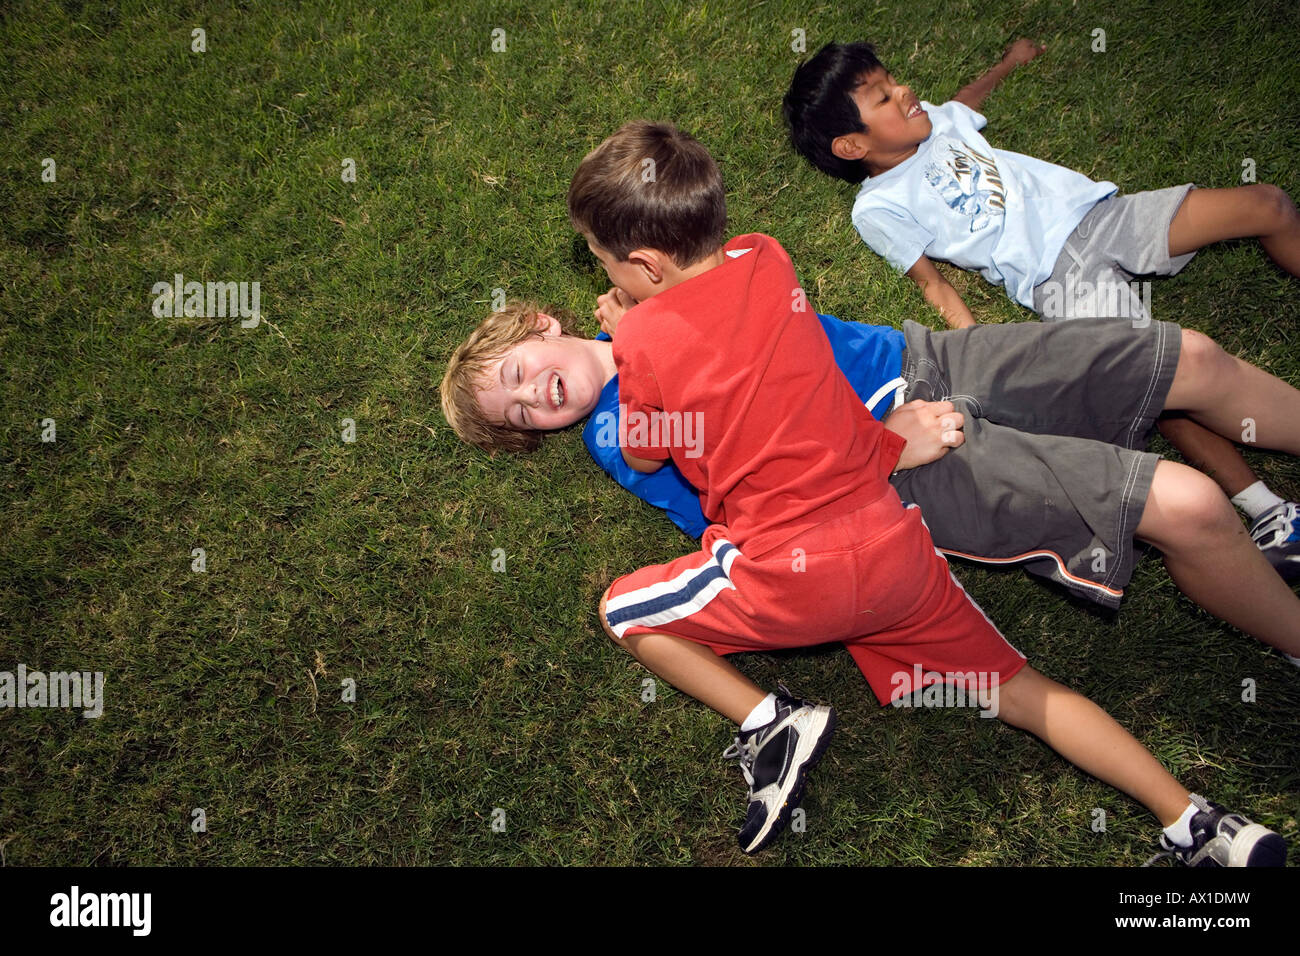 Boys Roughing Housing outside on Lawn Stock Photo